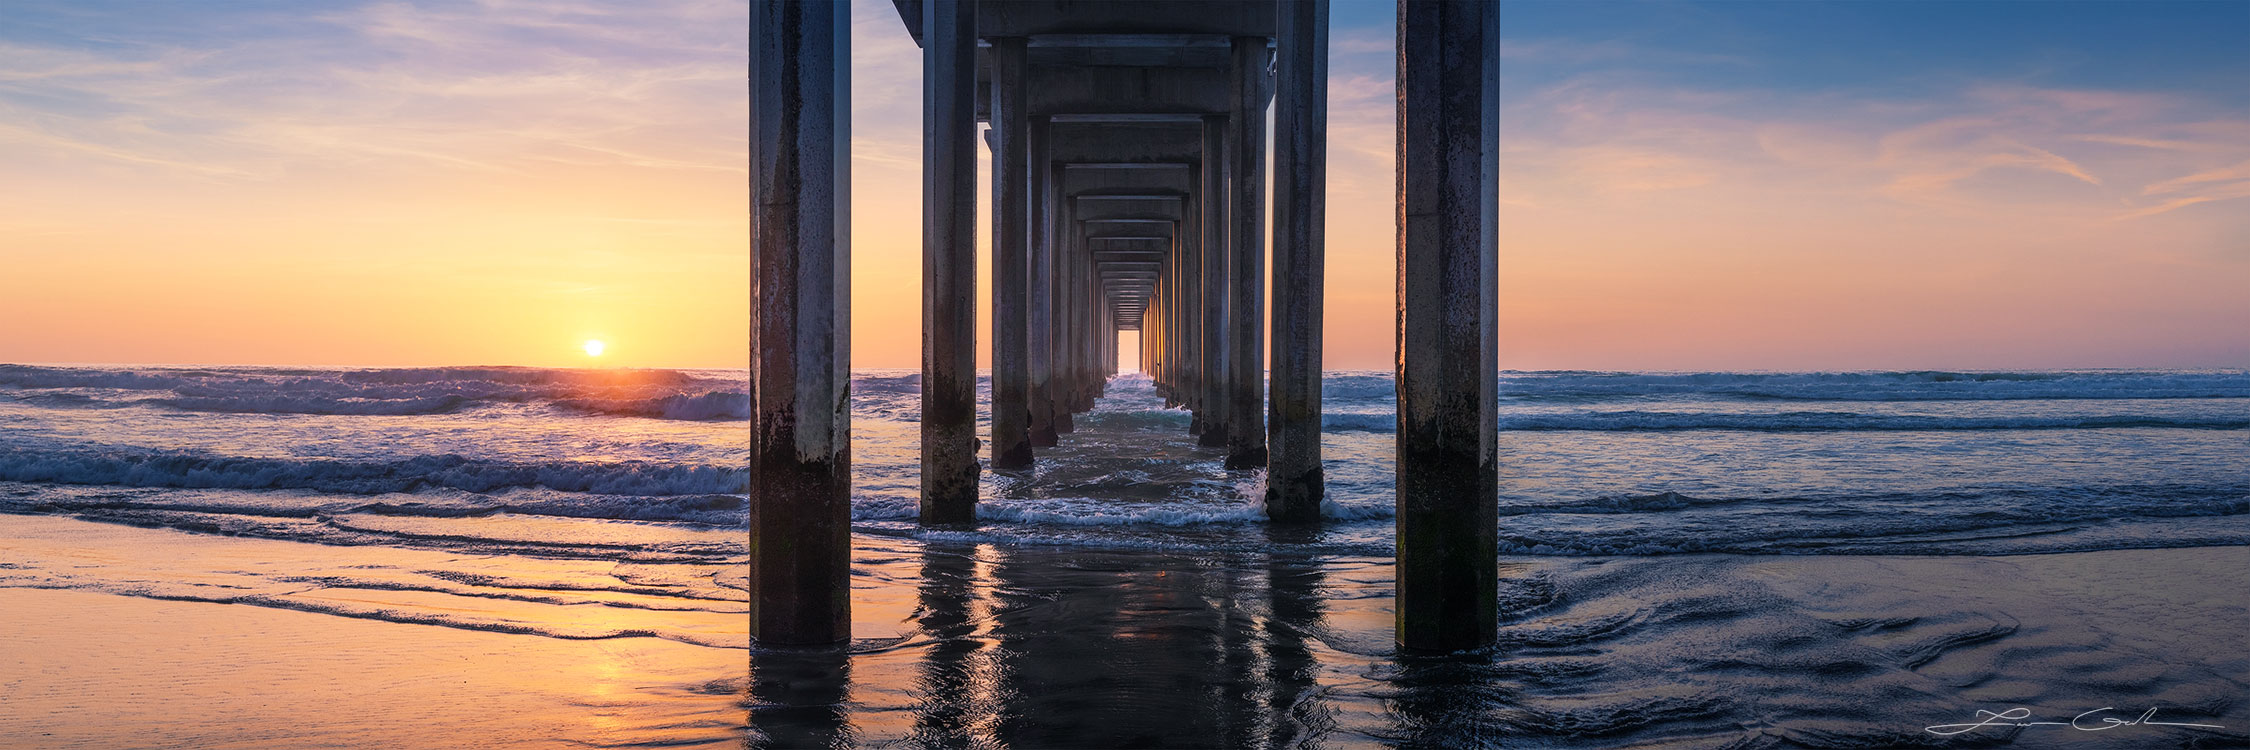 A California sunset warms the skies on a pleasant evening by the ocean beach - La Jolla’s Scripps Pier - Gintchin Fine Art